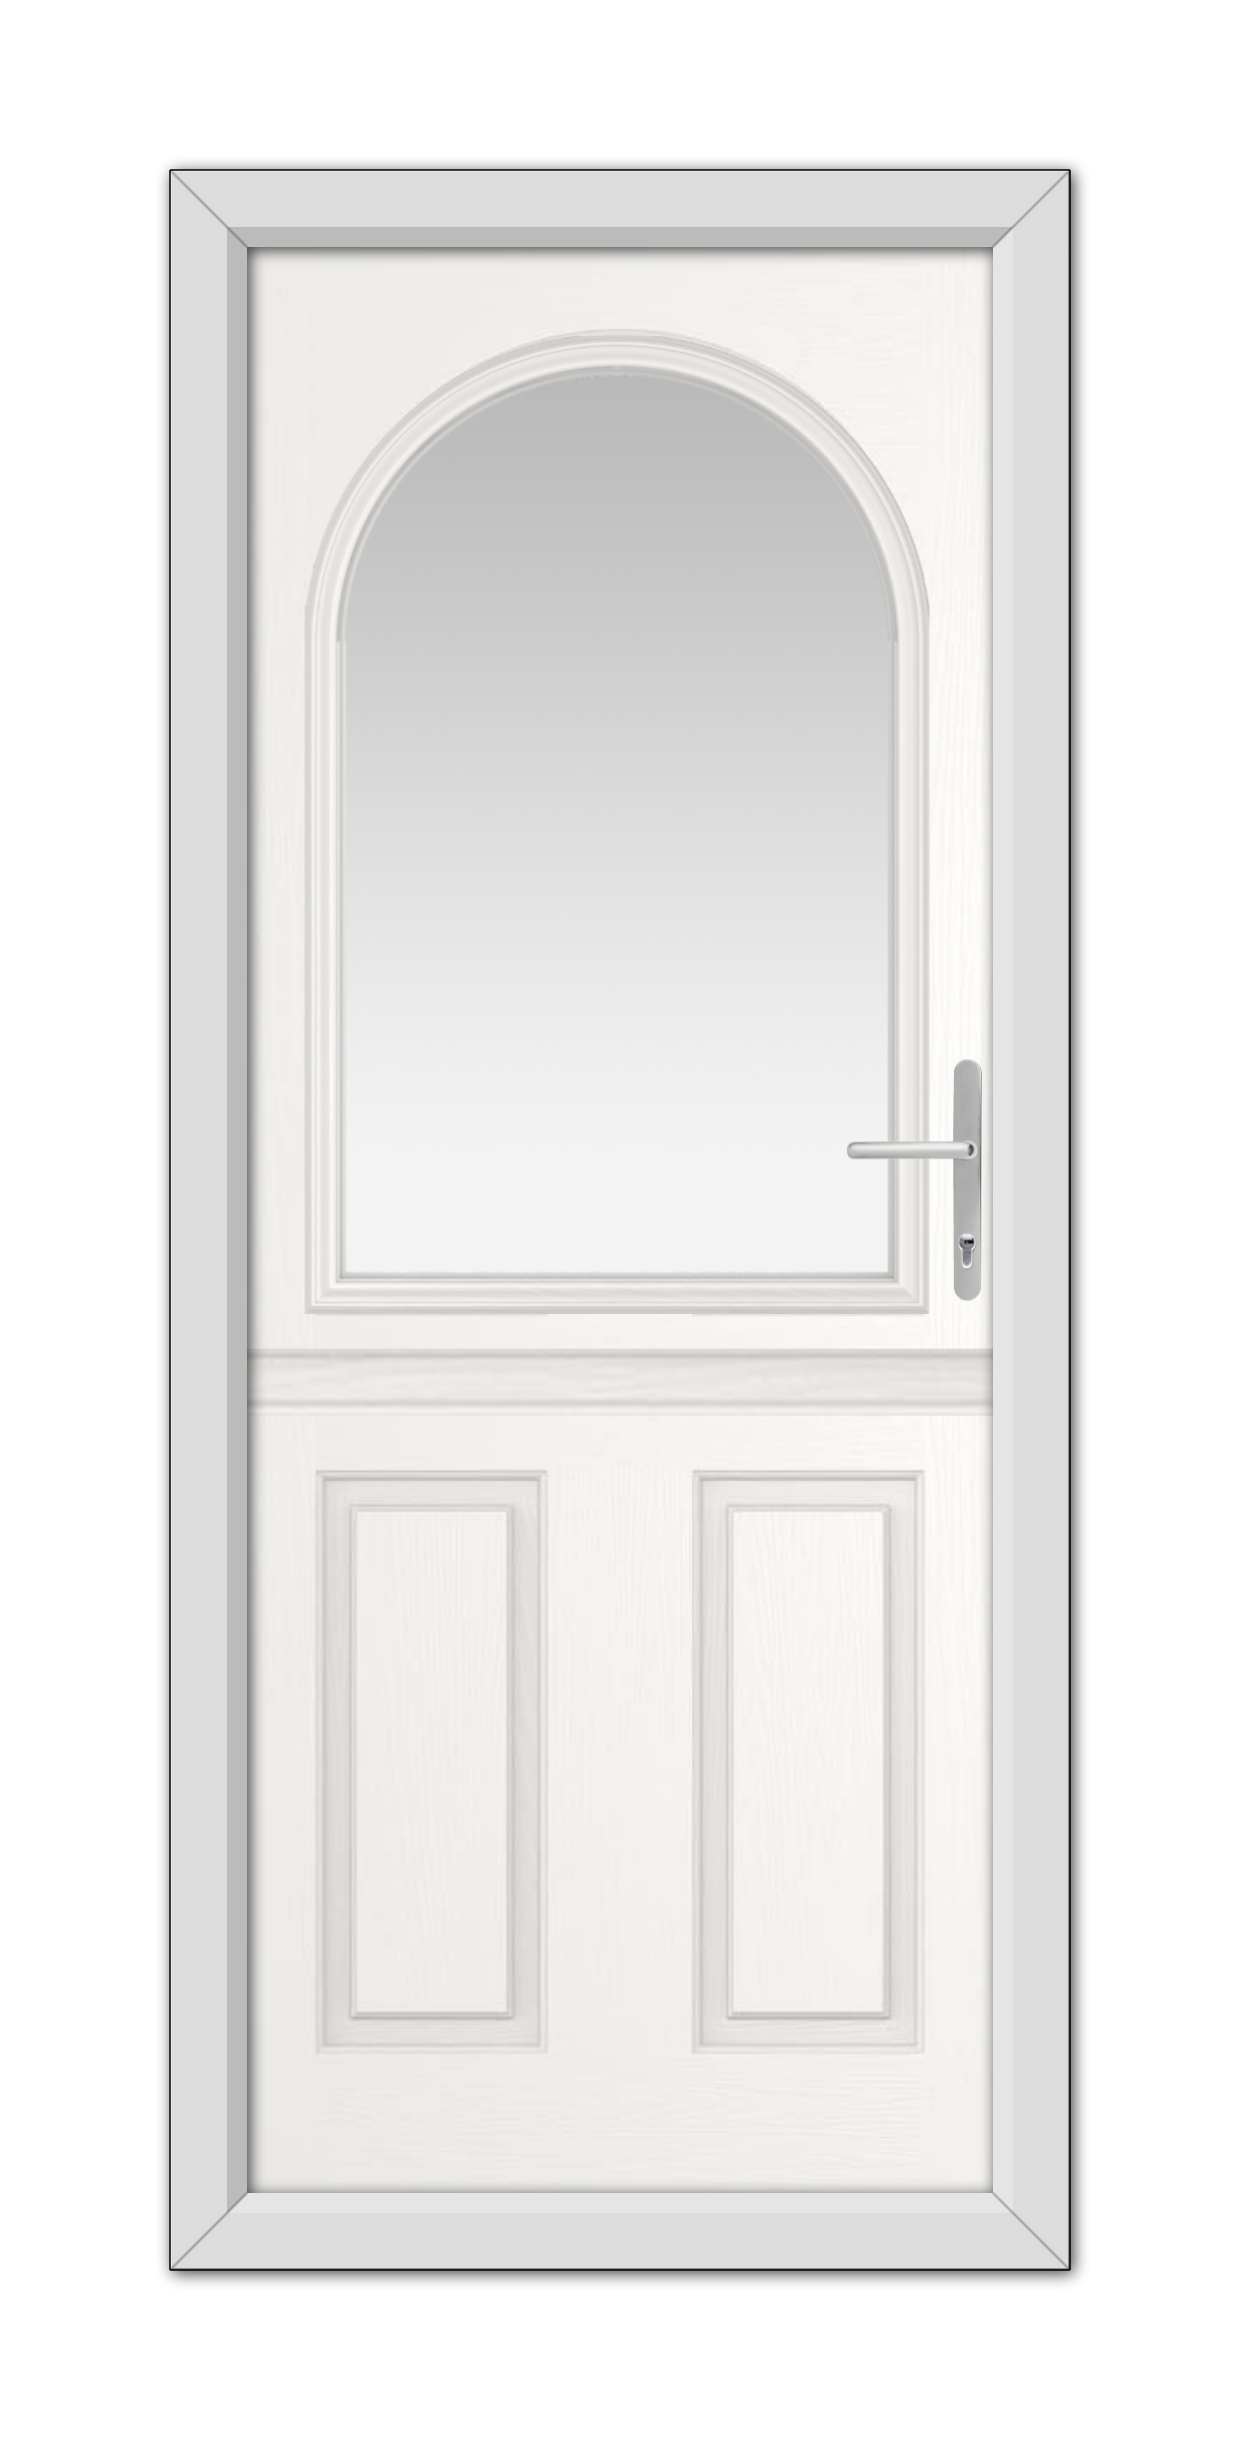 White Grafton Stable Composite Door 48mm Timber Core with an arched window at the top and a handle on the right side, set within a simple frame.